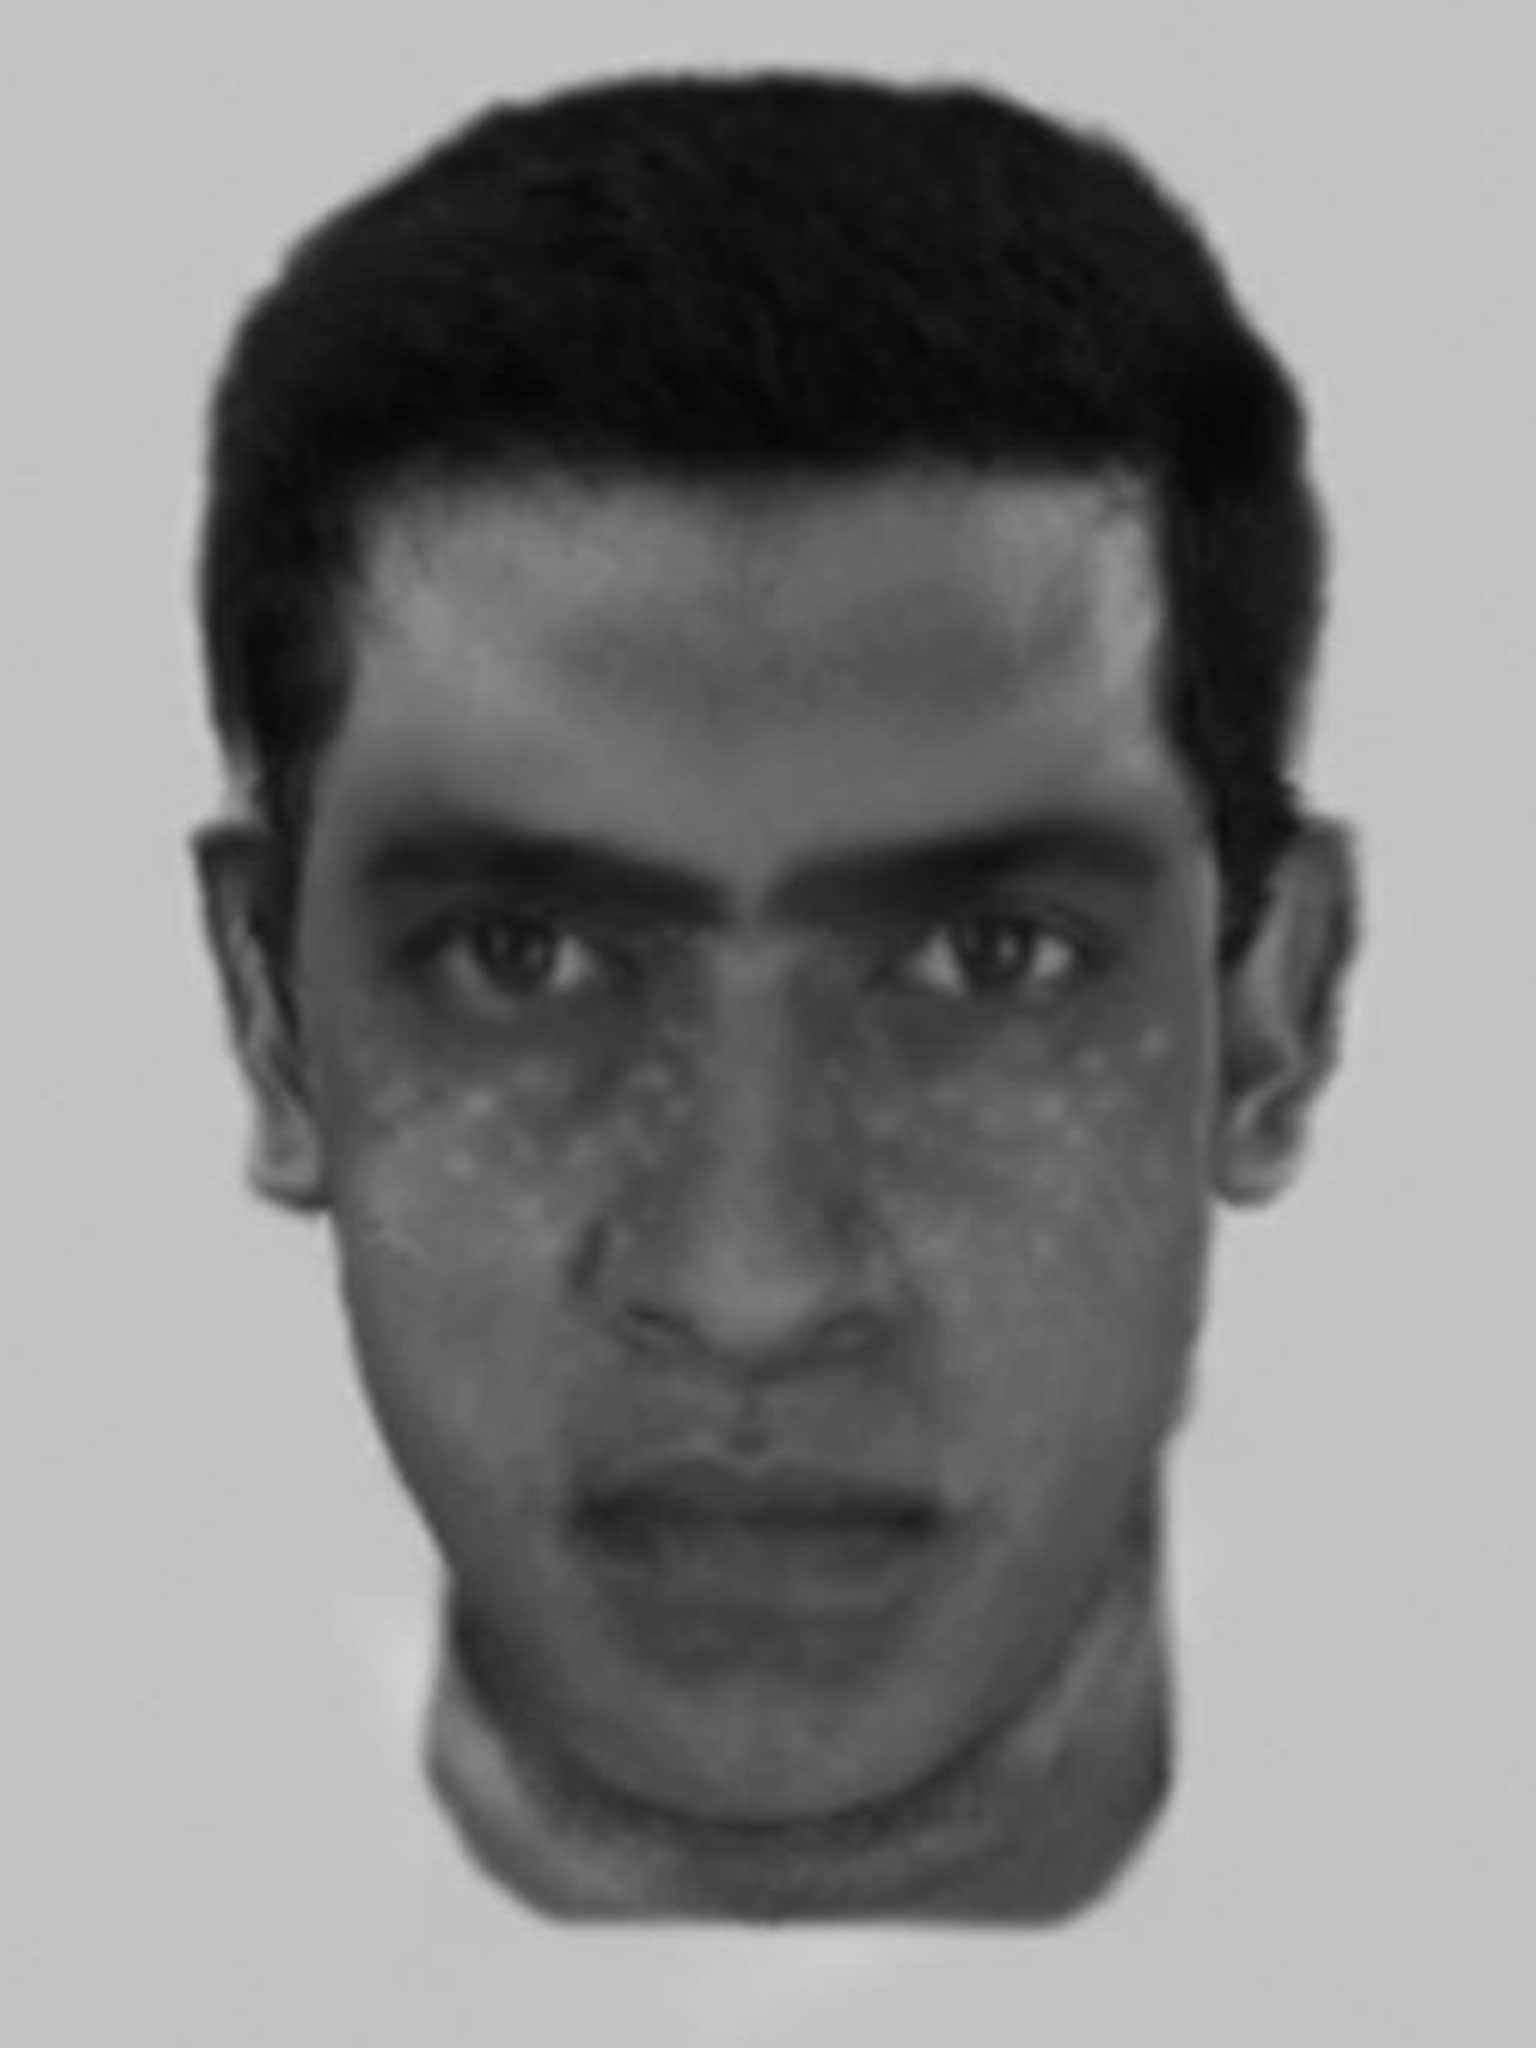 An e-fit of the man wanted in connection to the John Lewis car park rape